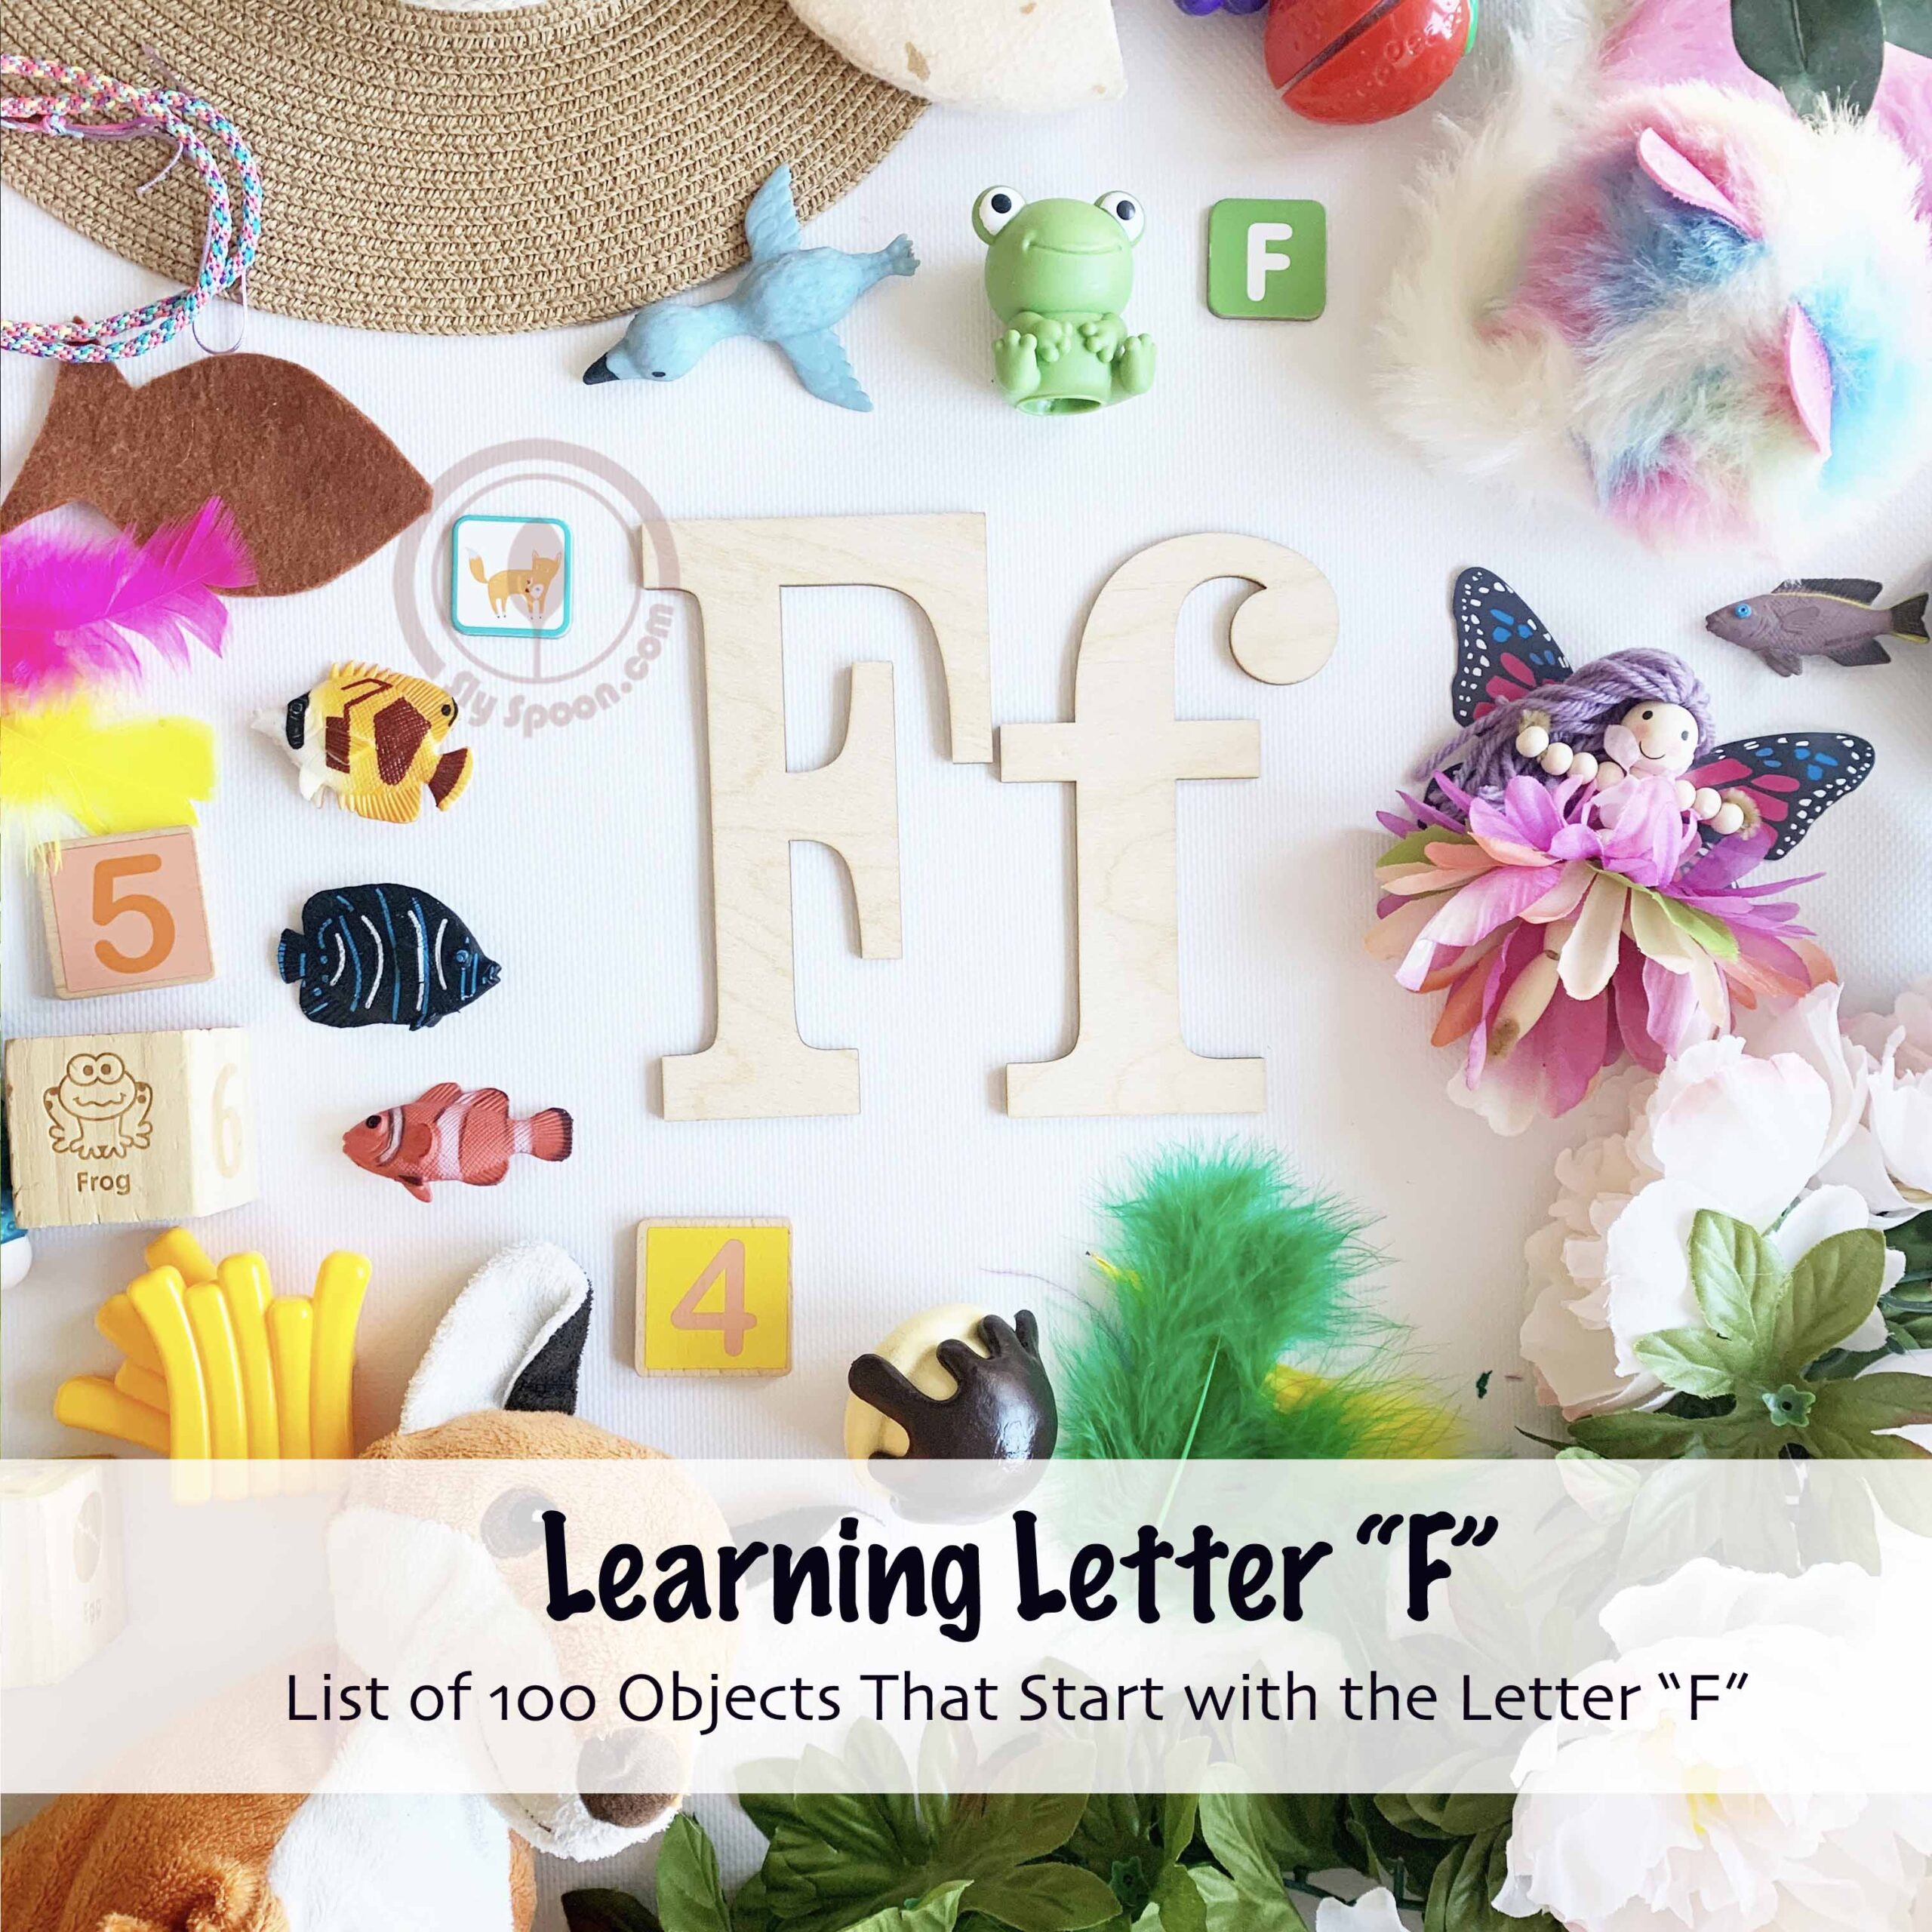 Big List of Objects and Things that start with Letter F